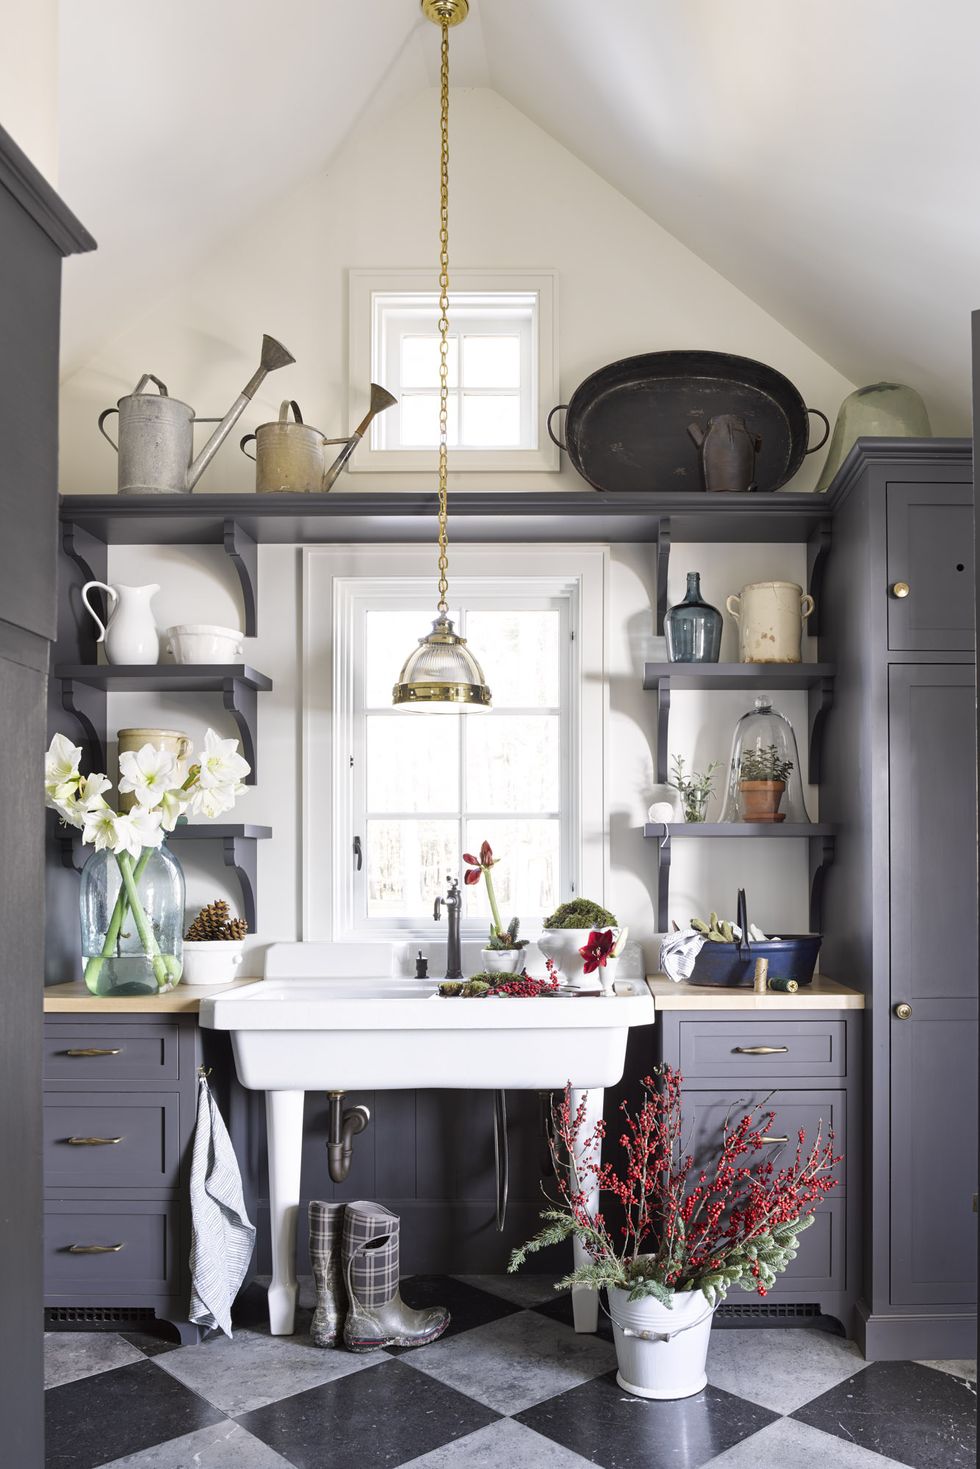 27 Chic French Country Kitchens